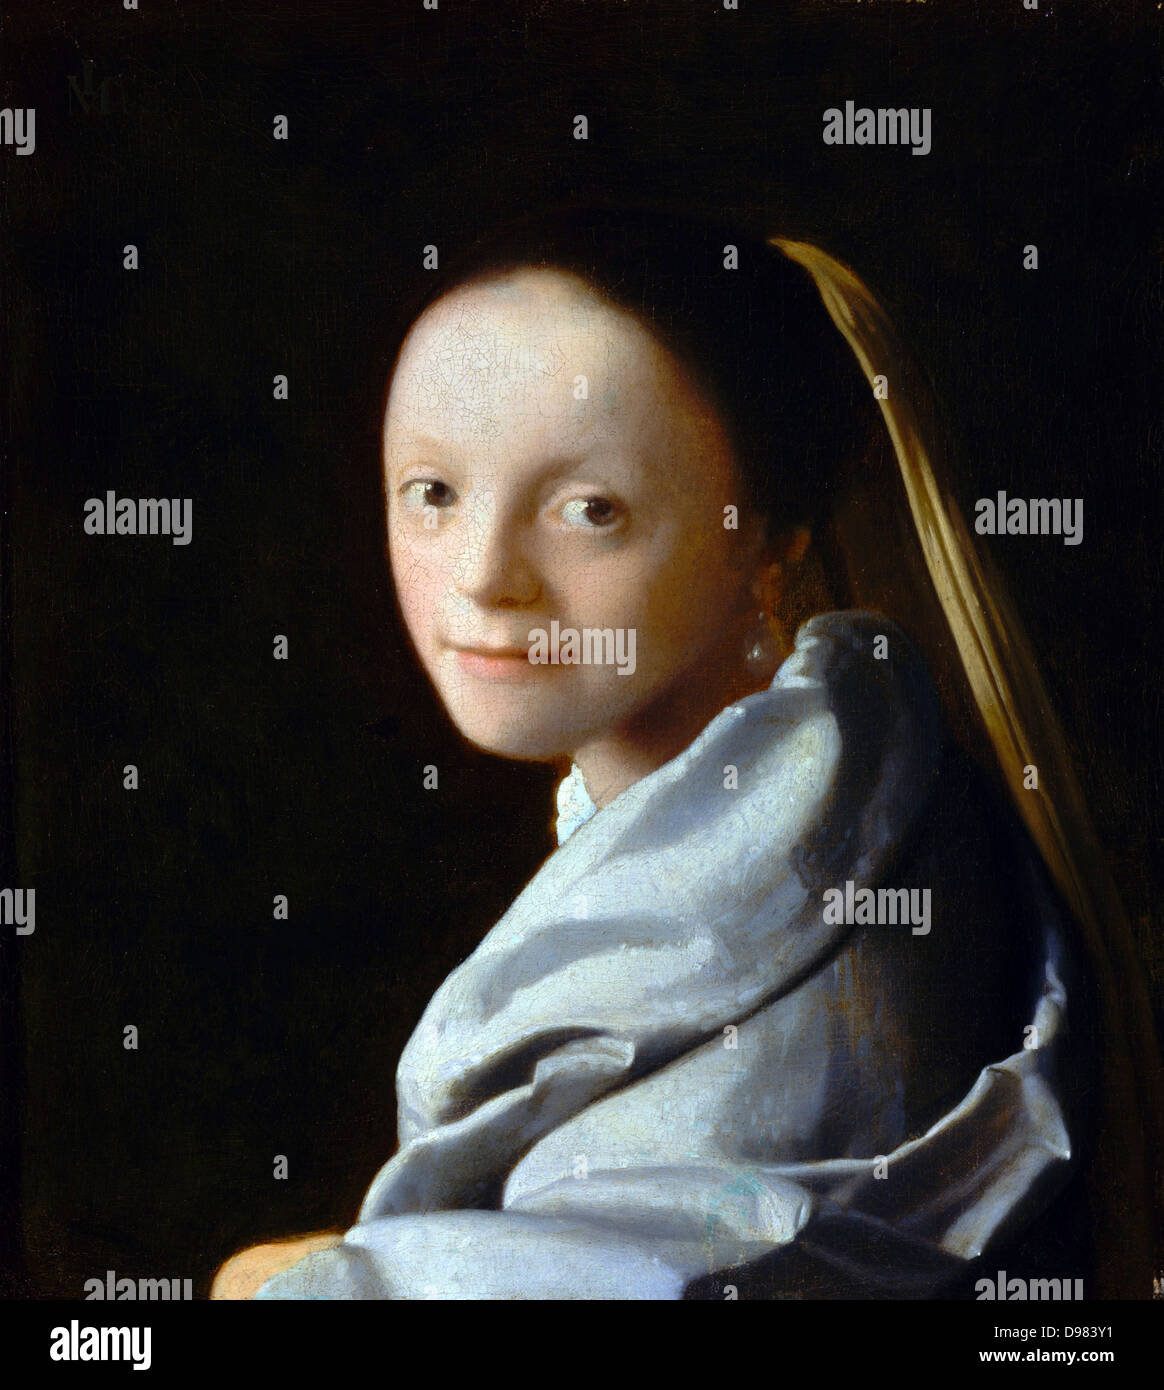 Johannes Vermeer, Portrait of a Young Woman 1665-1667 Oil on canvas. Metropolitan Museum of Art, New York City, USA. Stock Photo